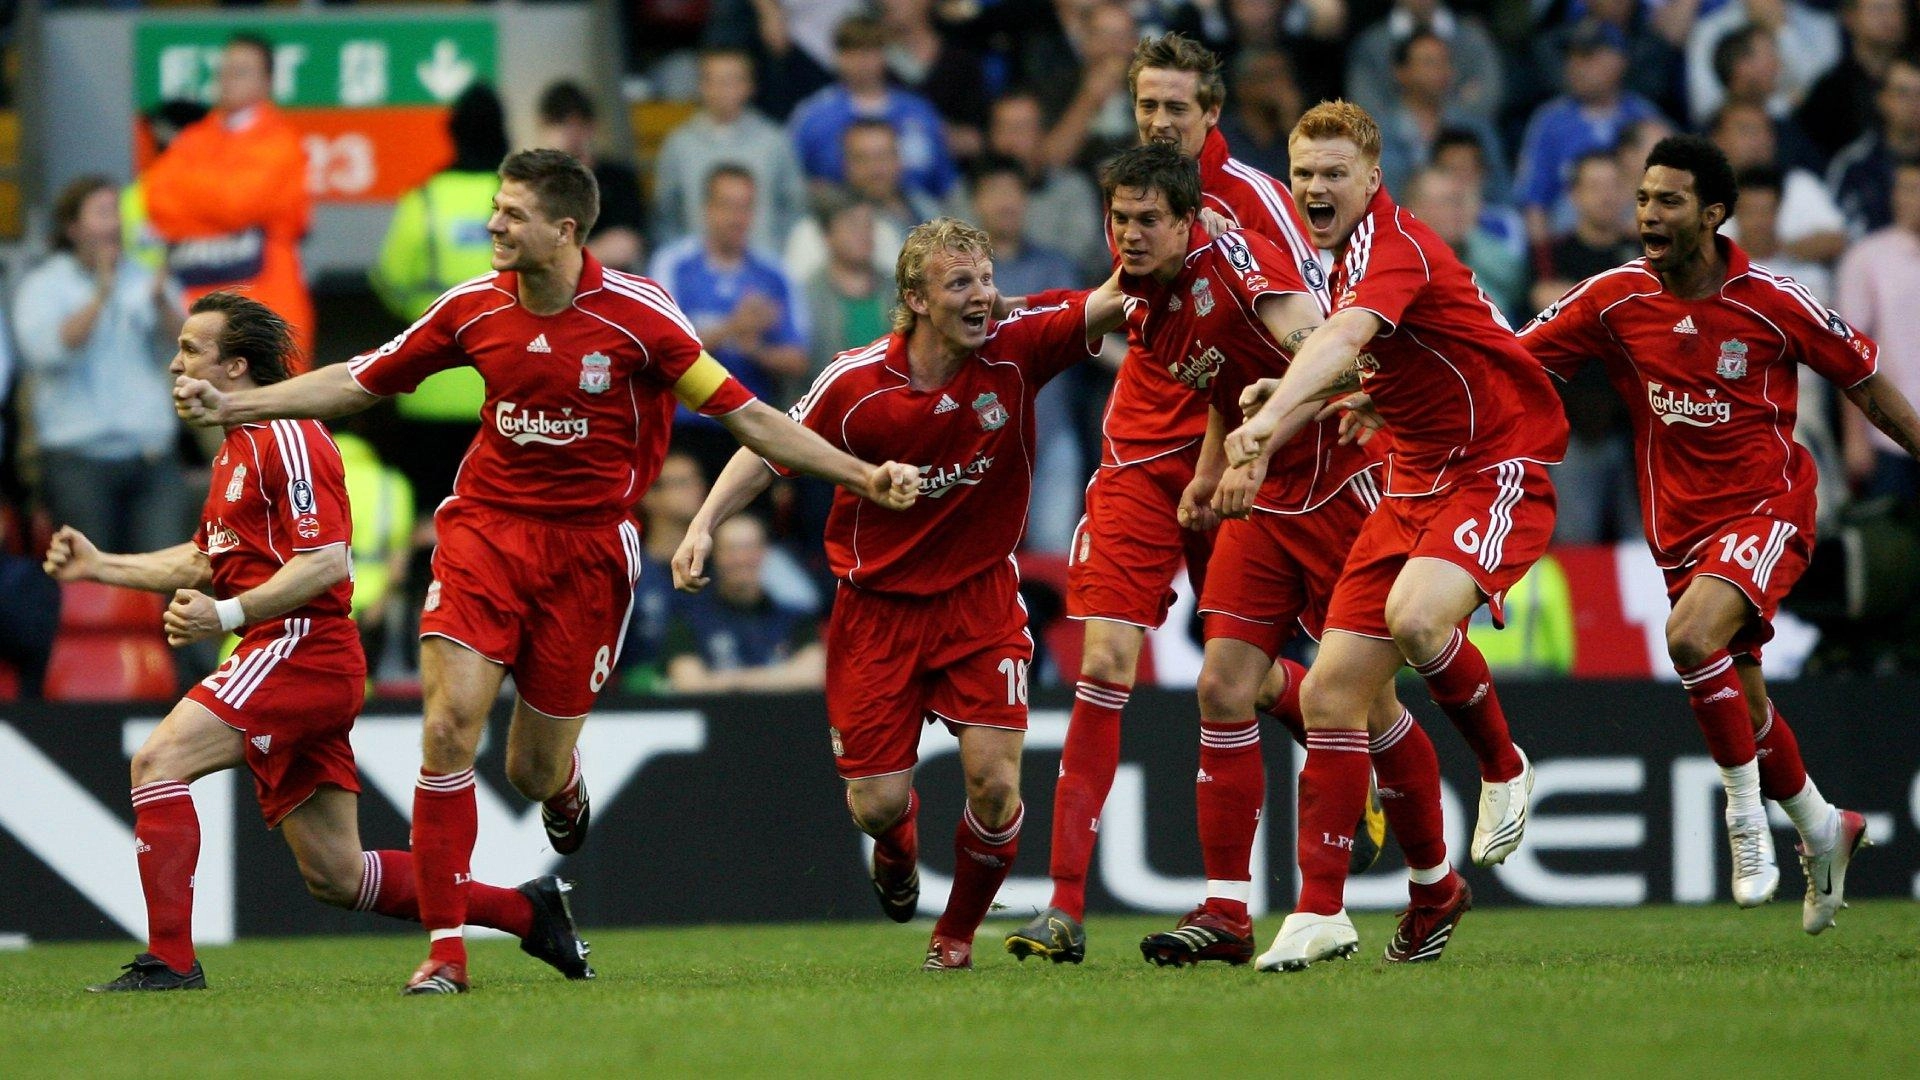 10 past cup showdowns between Chelsea and Liverpool - Liverpool FC